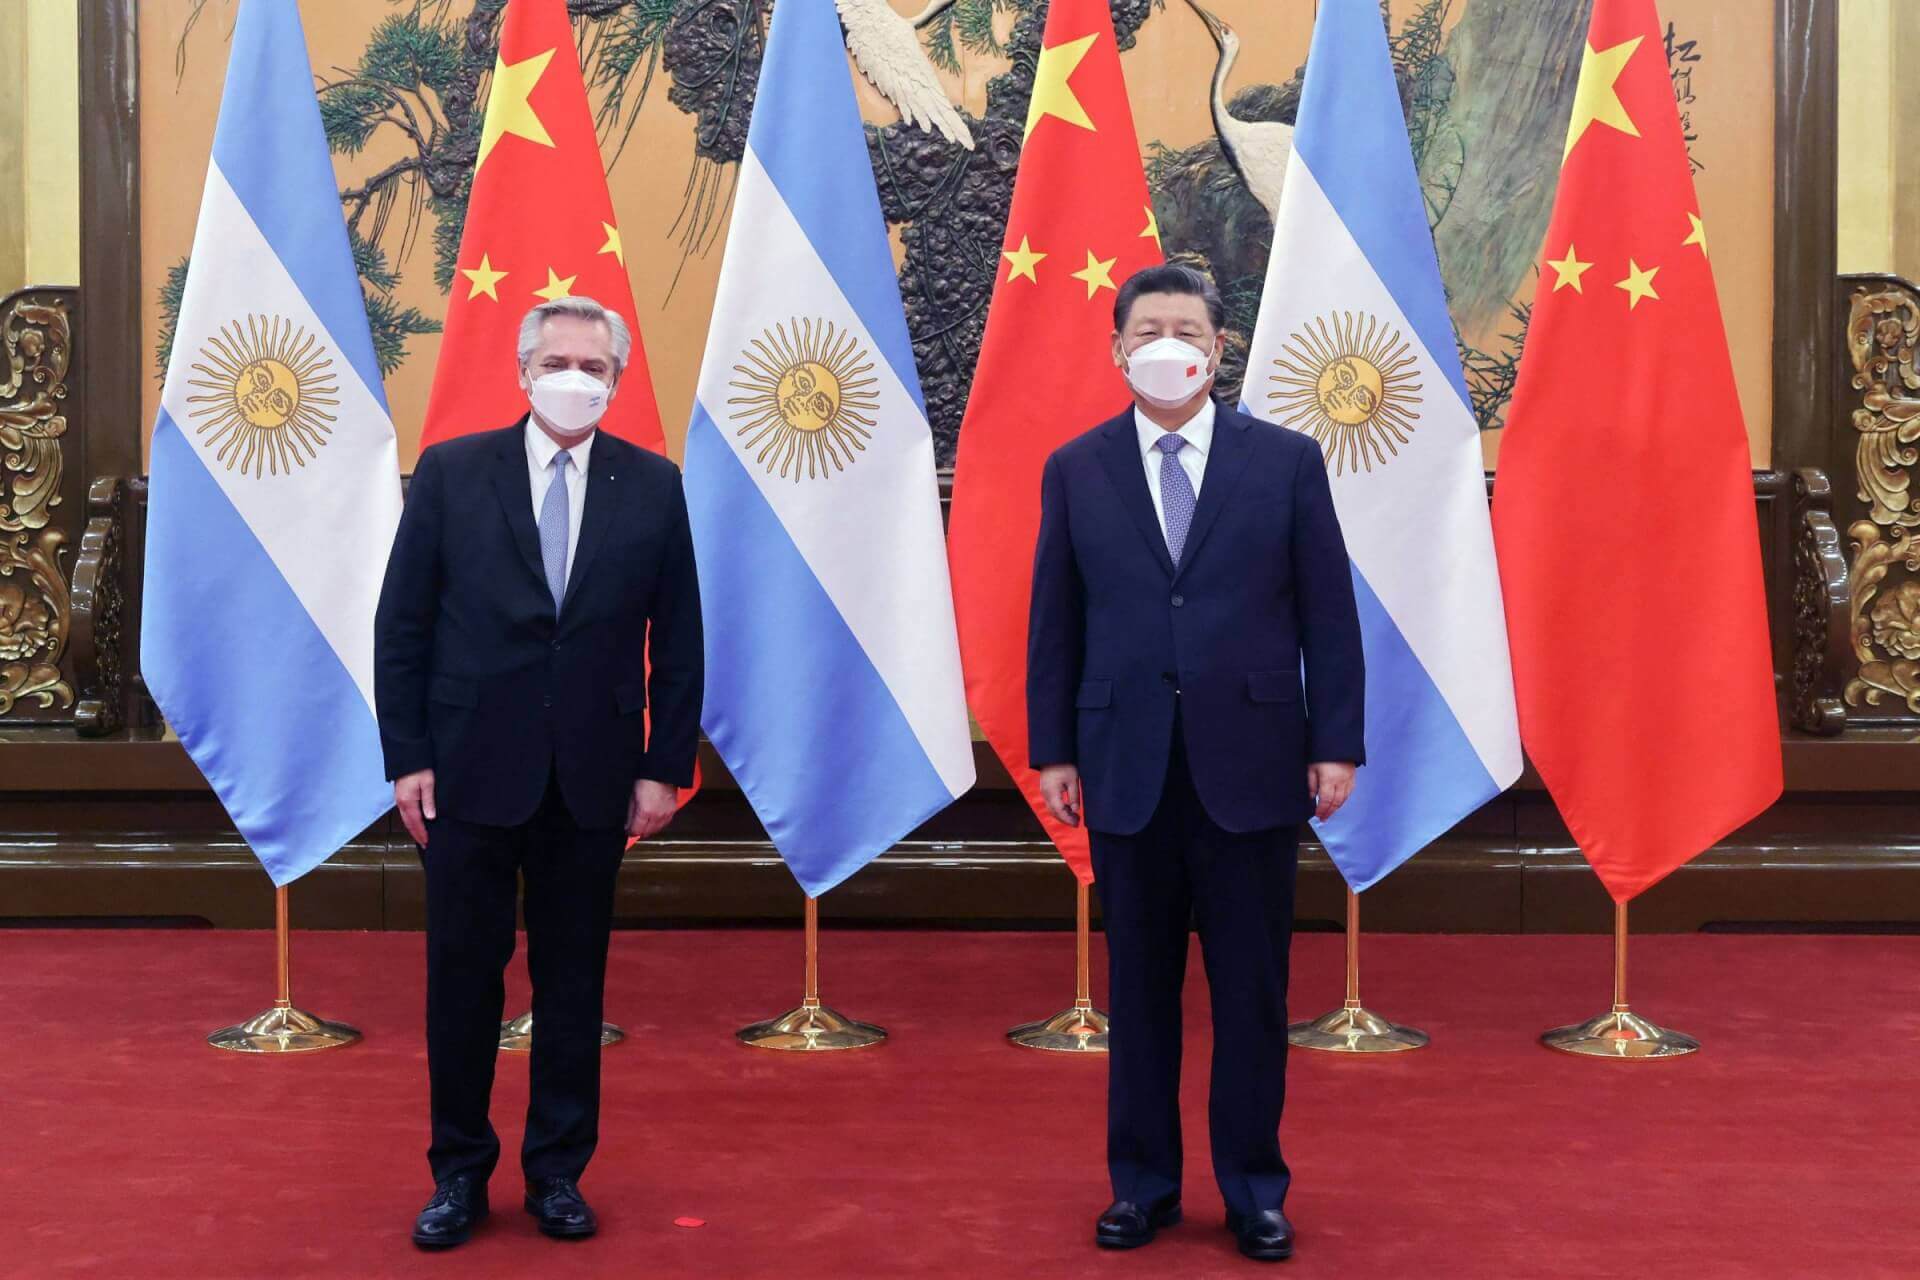 Argentina Officially Joins China’s Belt & Road Initiative